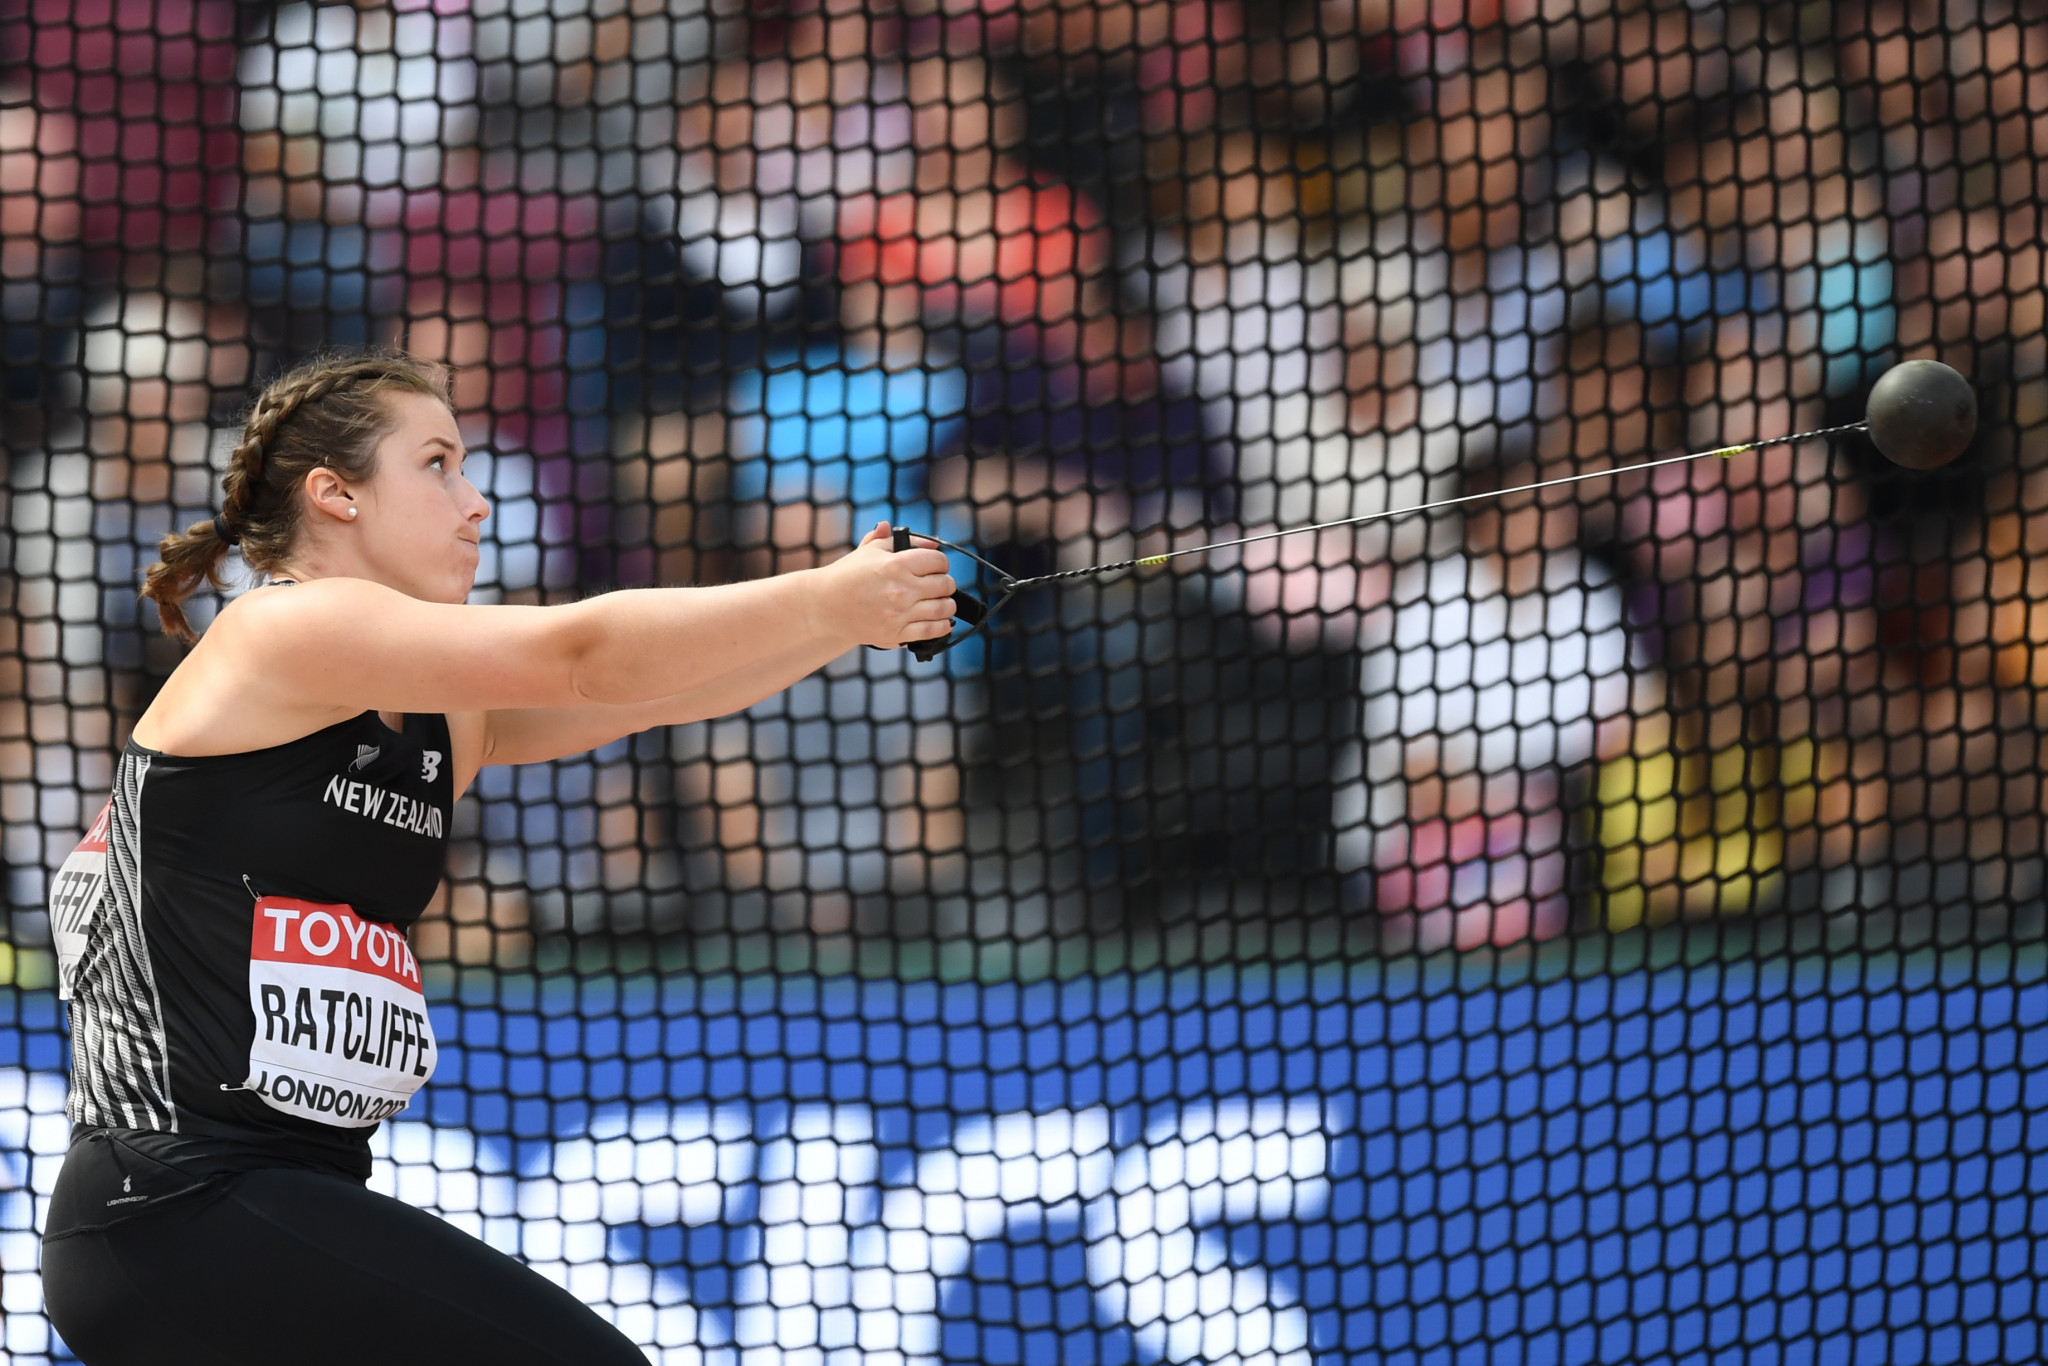 New Zealand's Julia Ratcliffe won the women's hammer throw event on her return from a lengthy absence ©Getty Images